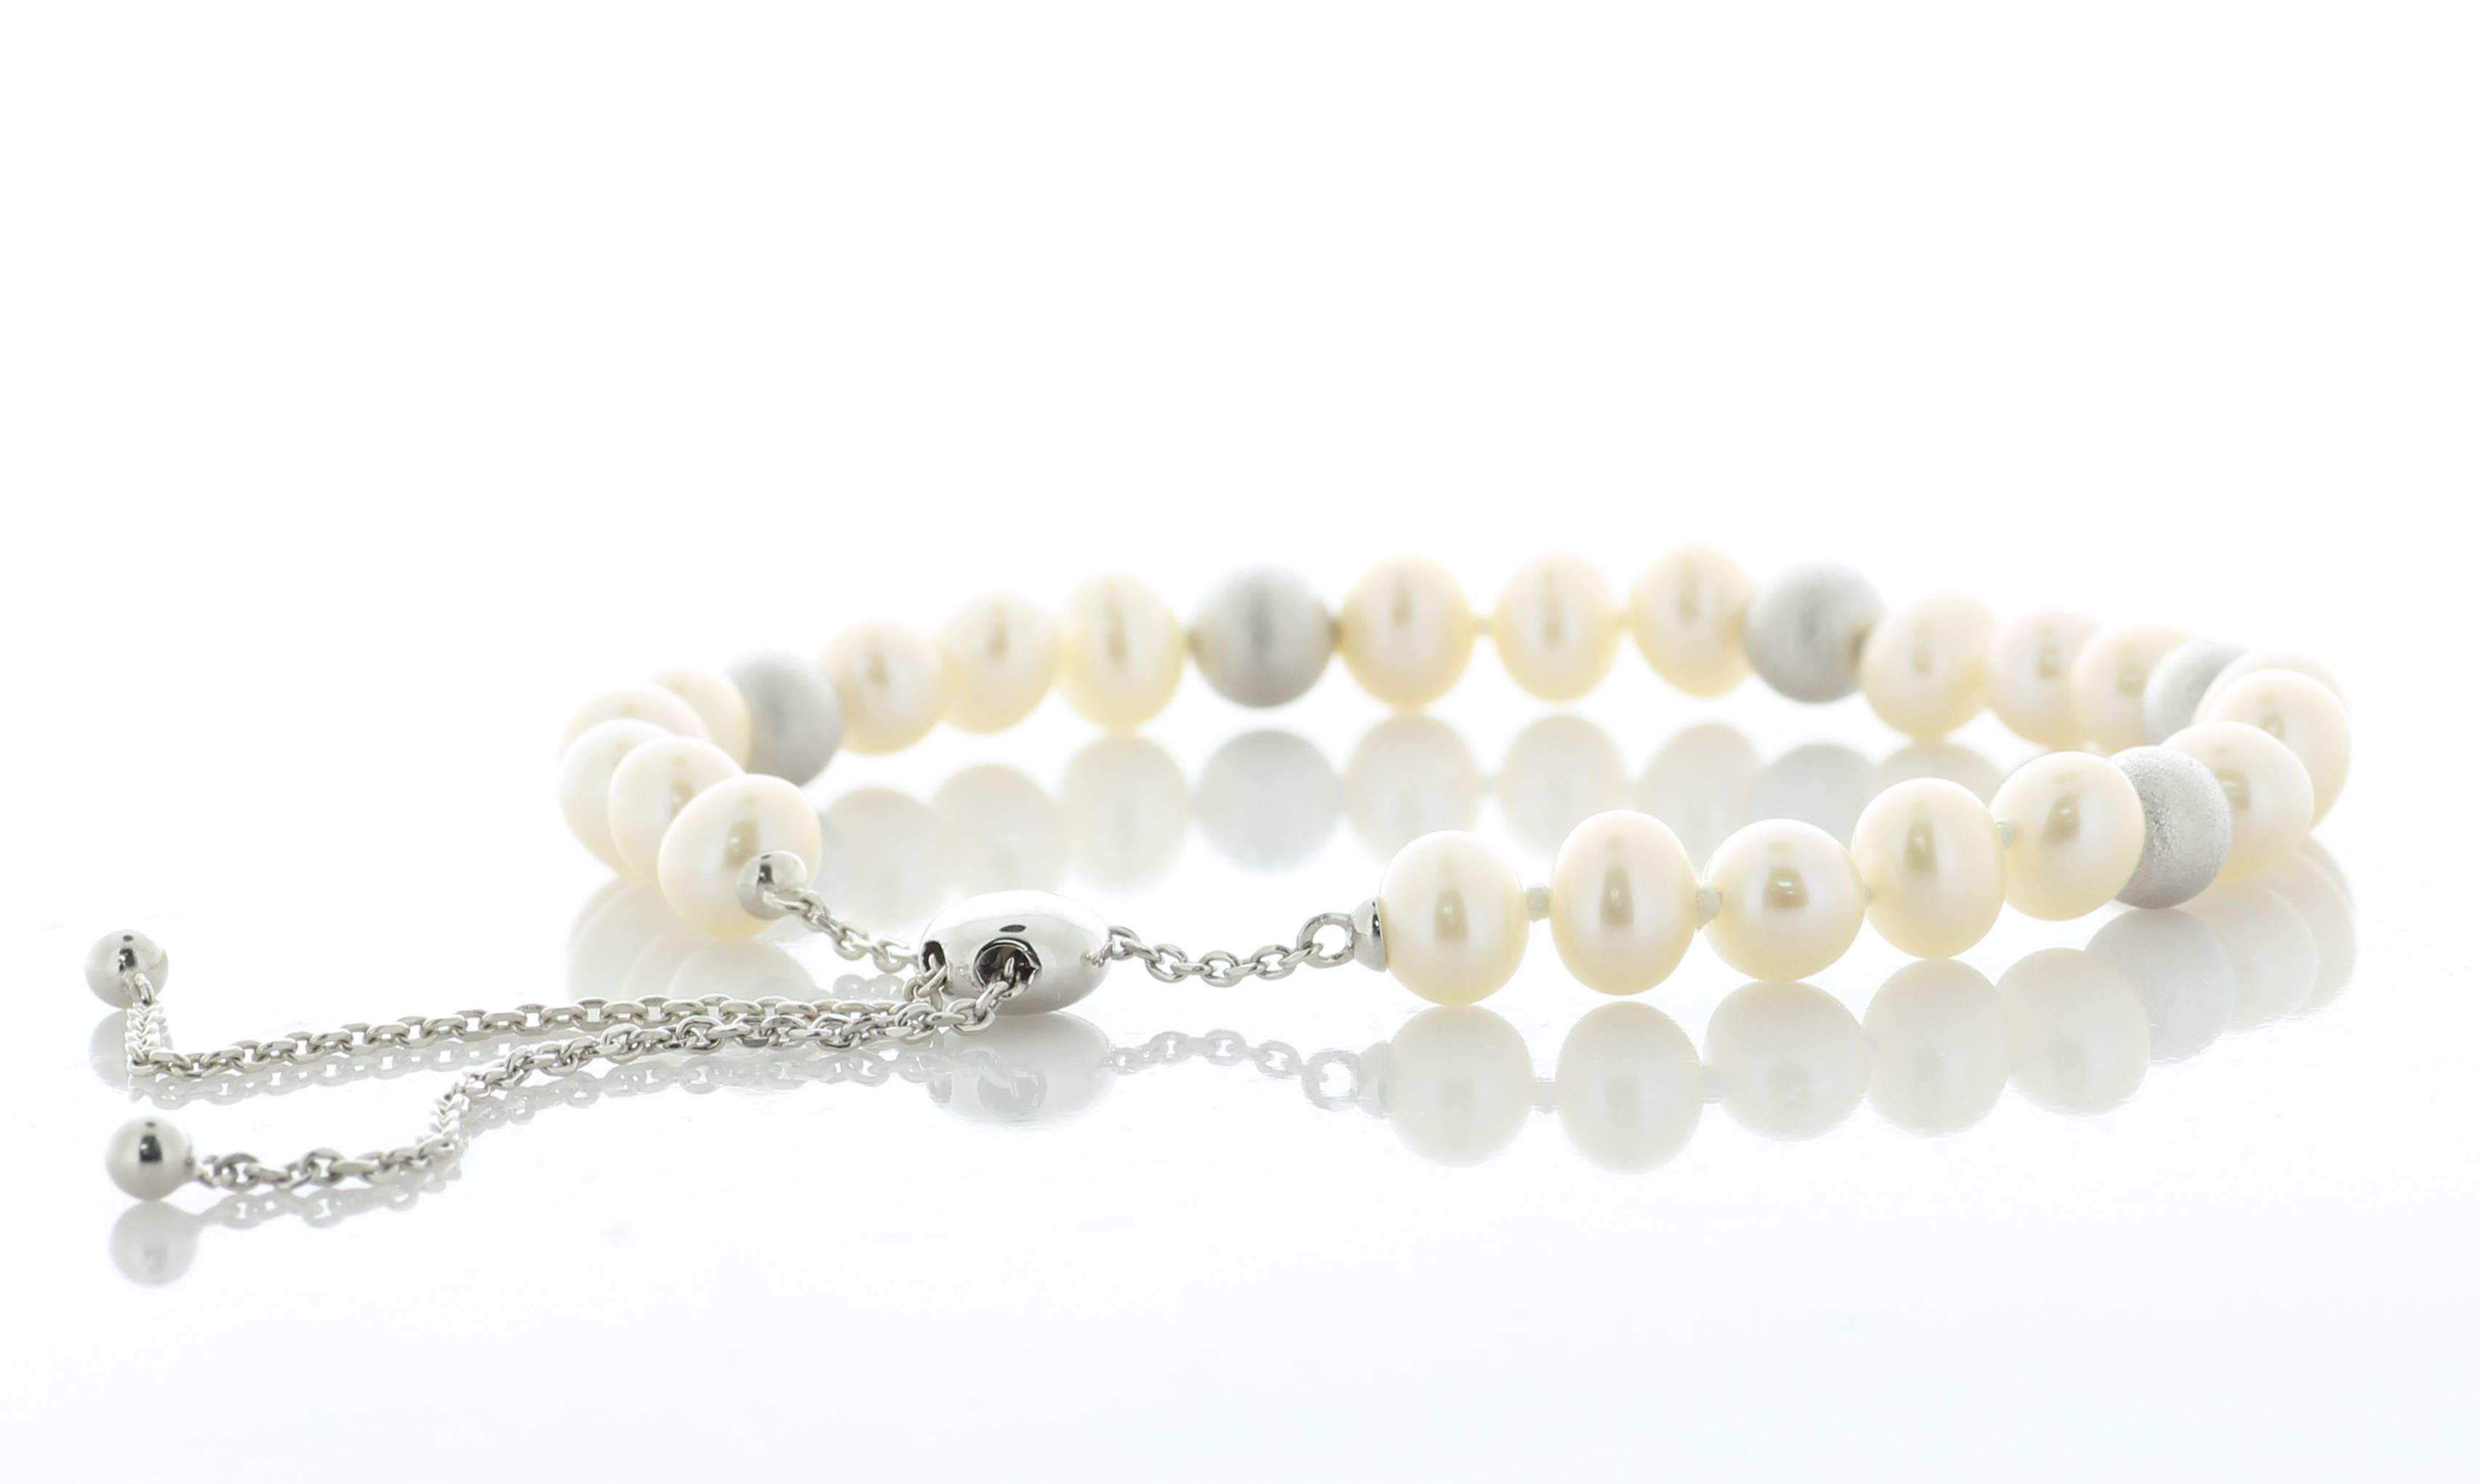 Freshwater Cultured 5.5 - 6.0mm Pearl Bracelet With Silver Clasp and Fastening - Image 2 of 3